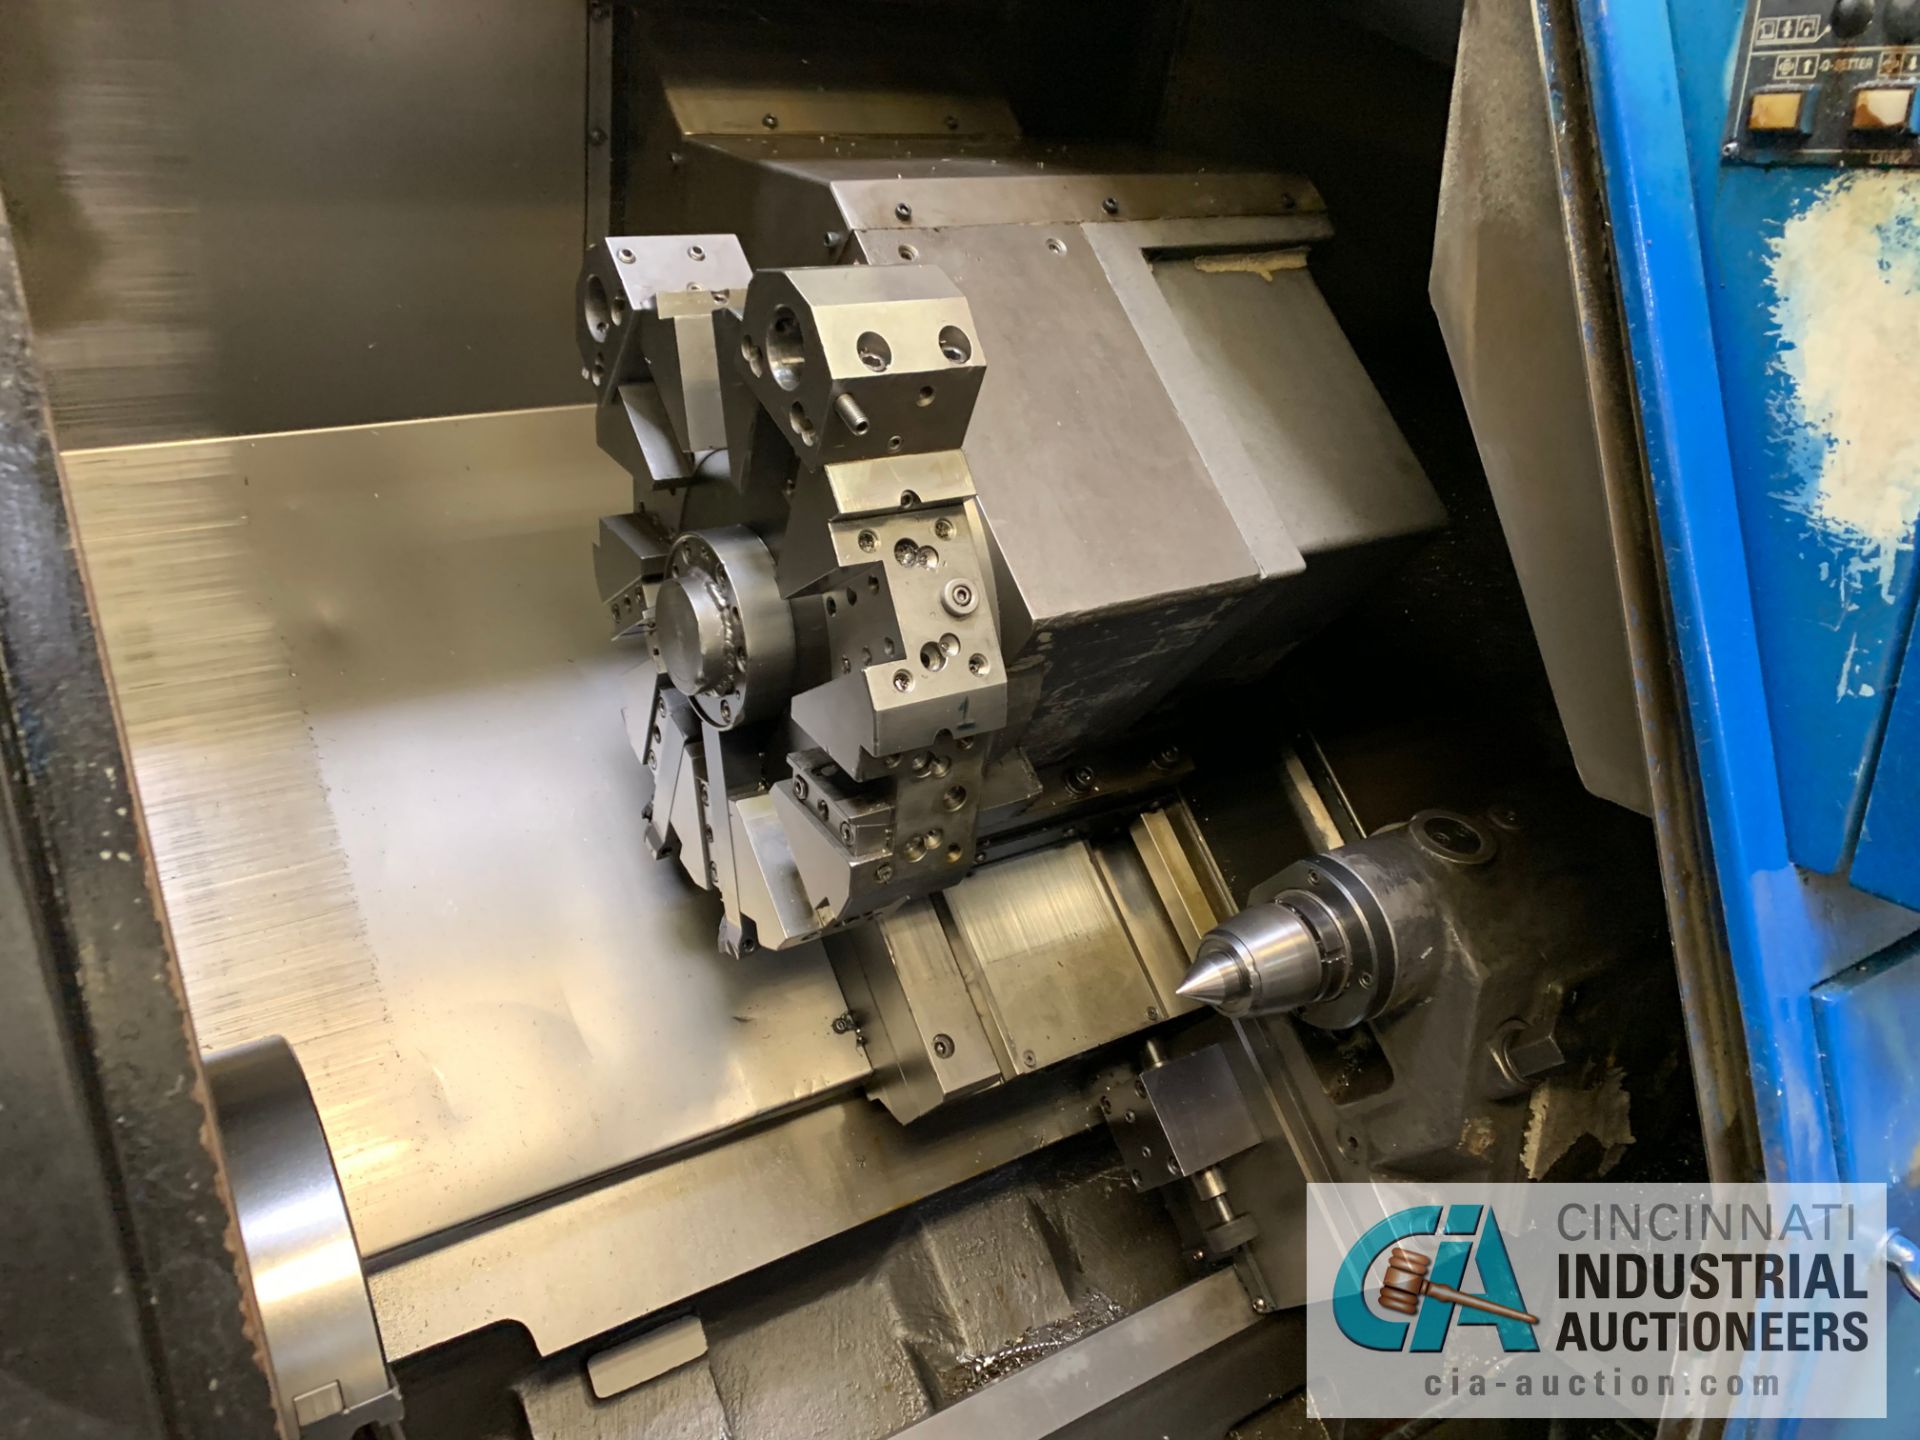 DAEWOO MODEL 200C CNC TURNING CENTER; S/N PM200550, 10" CHUCK, 10-STATION TURRET, TAILSTOCK, TURBO - Image 3 of 9